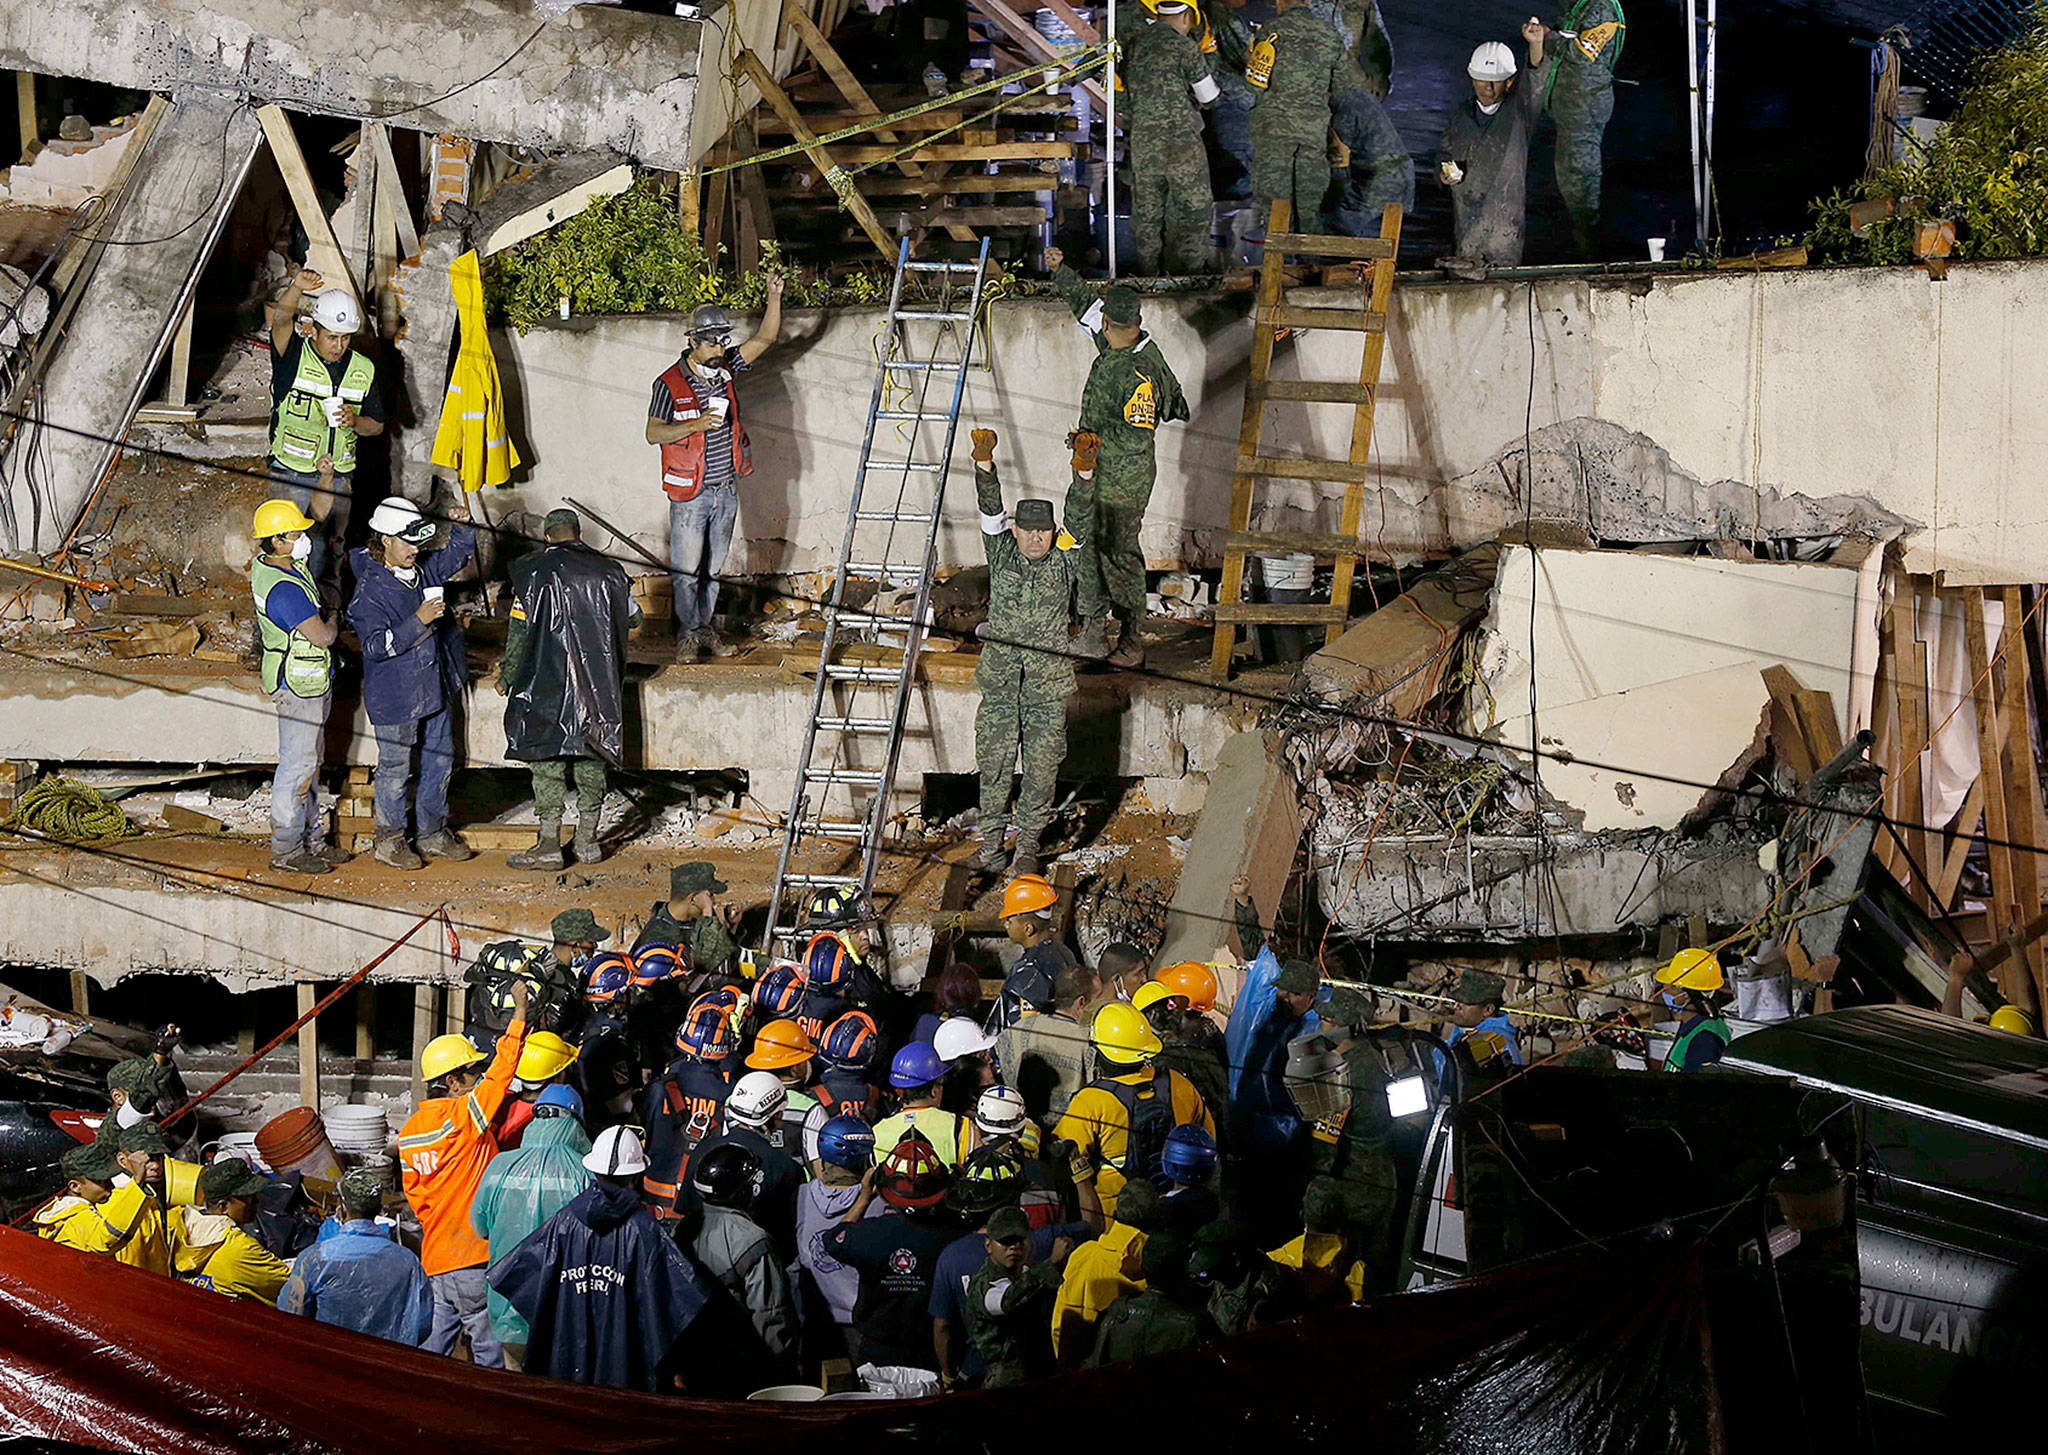 Rescue personnel work to rescue a trapped child at the collapsed Enrique Rebsamen primary school in Mexico City on Wednesday. But she never existed, Mexican officials now say. (AP Photo/Marco Ugarte)